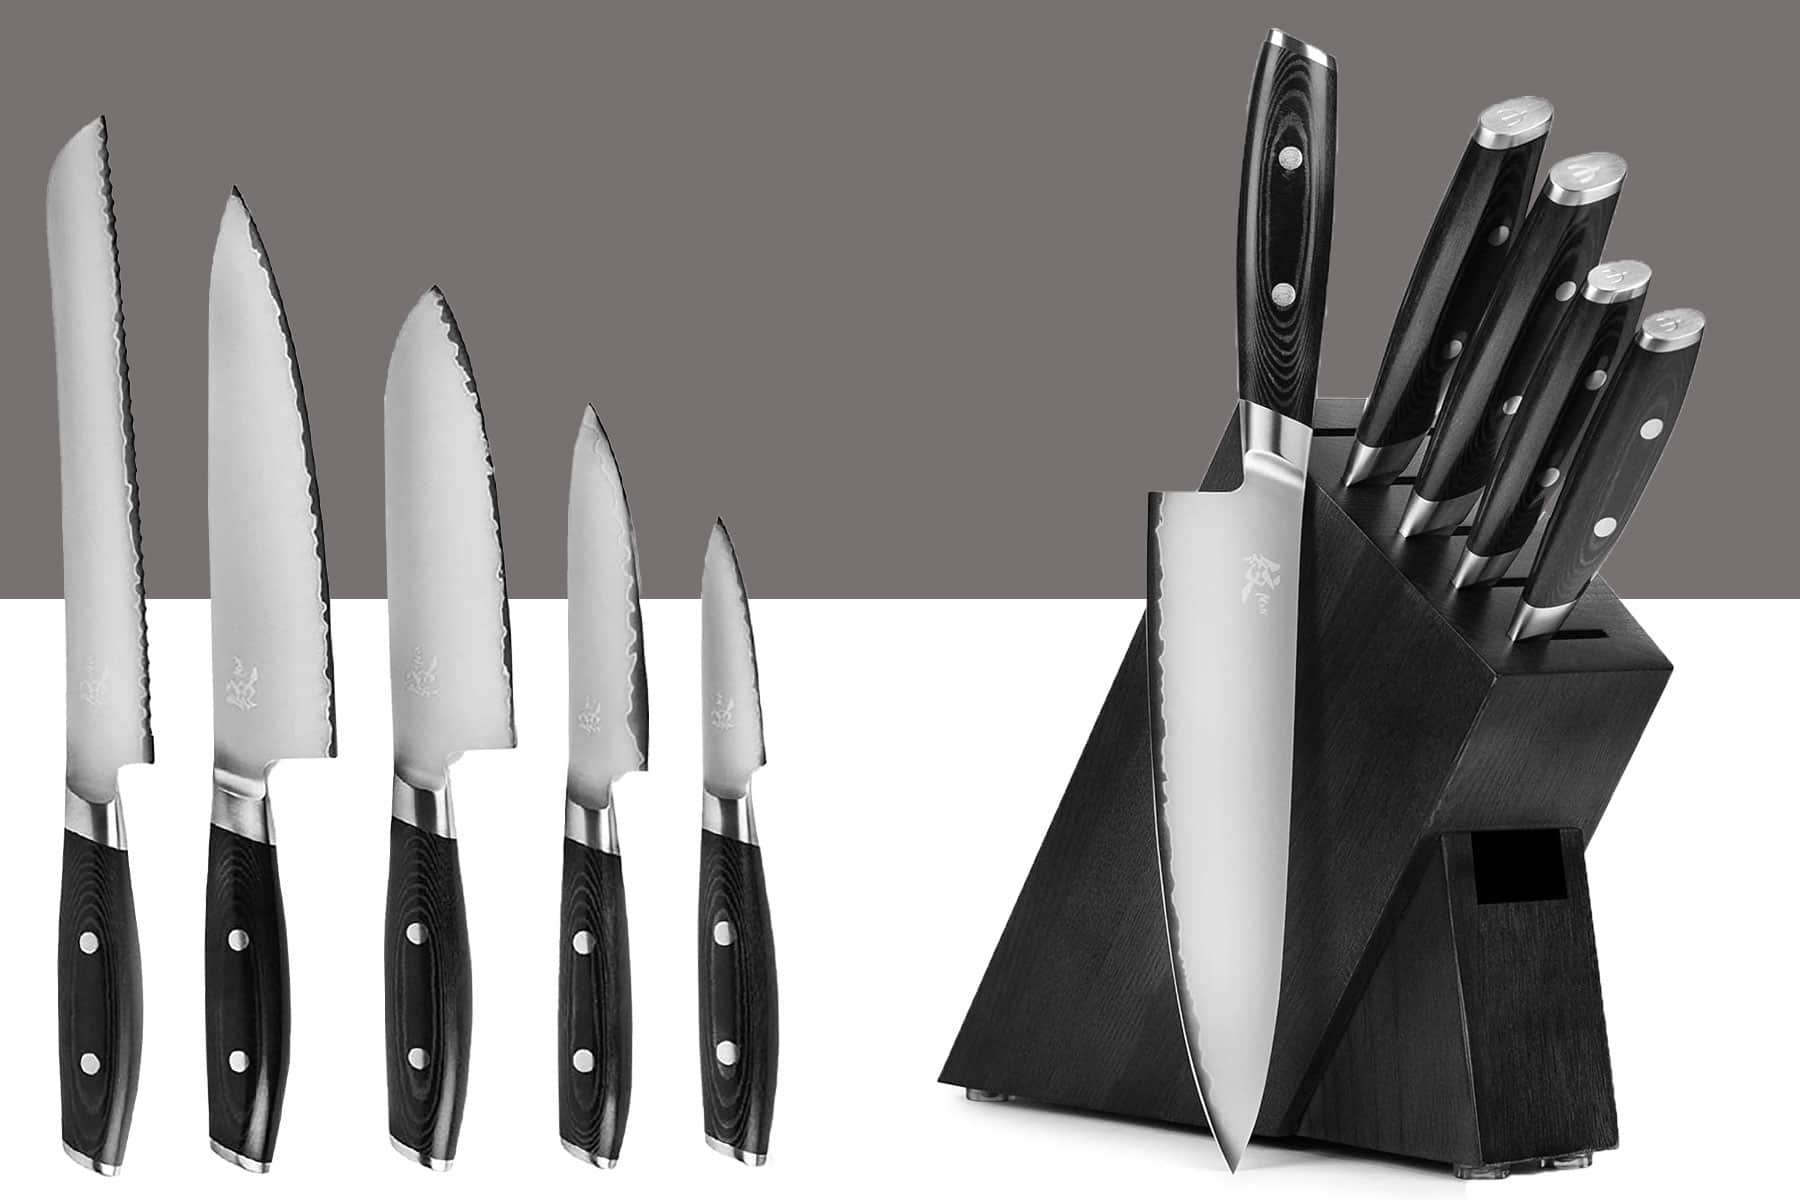 The Yaxell Mon 6-piece knife set shown with the knives inside and outside the storage block on a split white and gray background. 